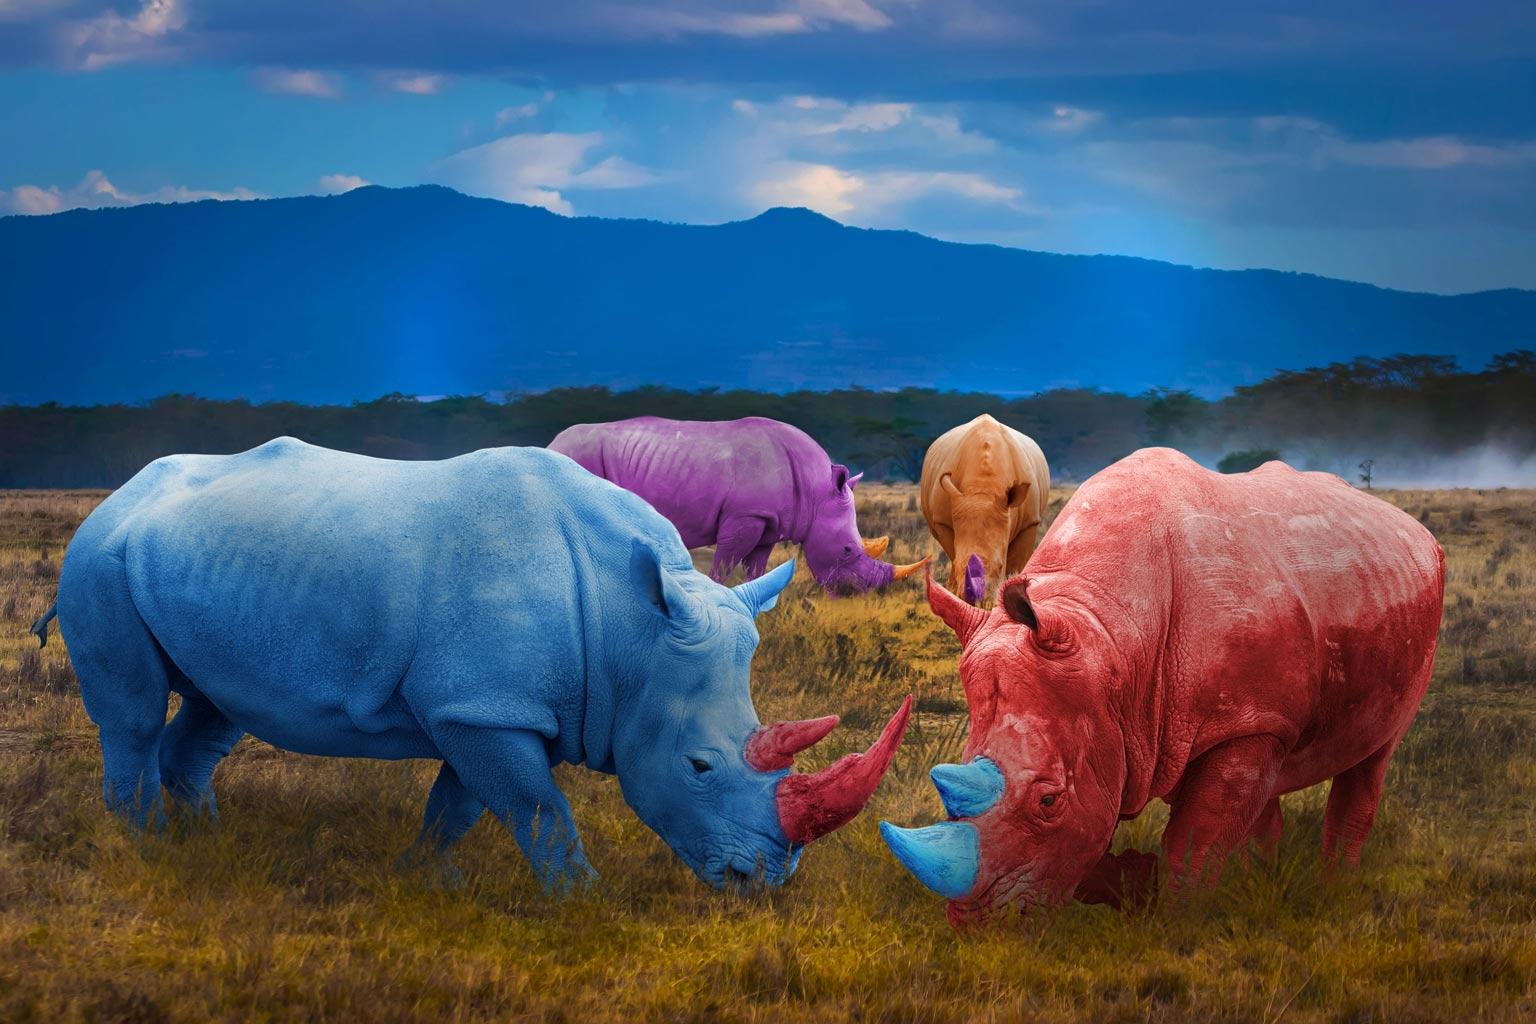 Photography Print - Animal Art - Gillie and Marc - Colourful Rhinos in field